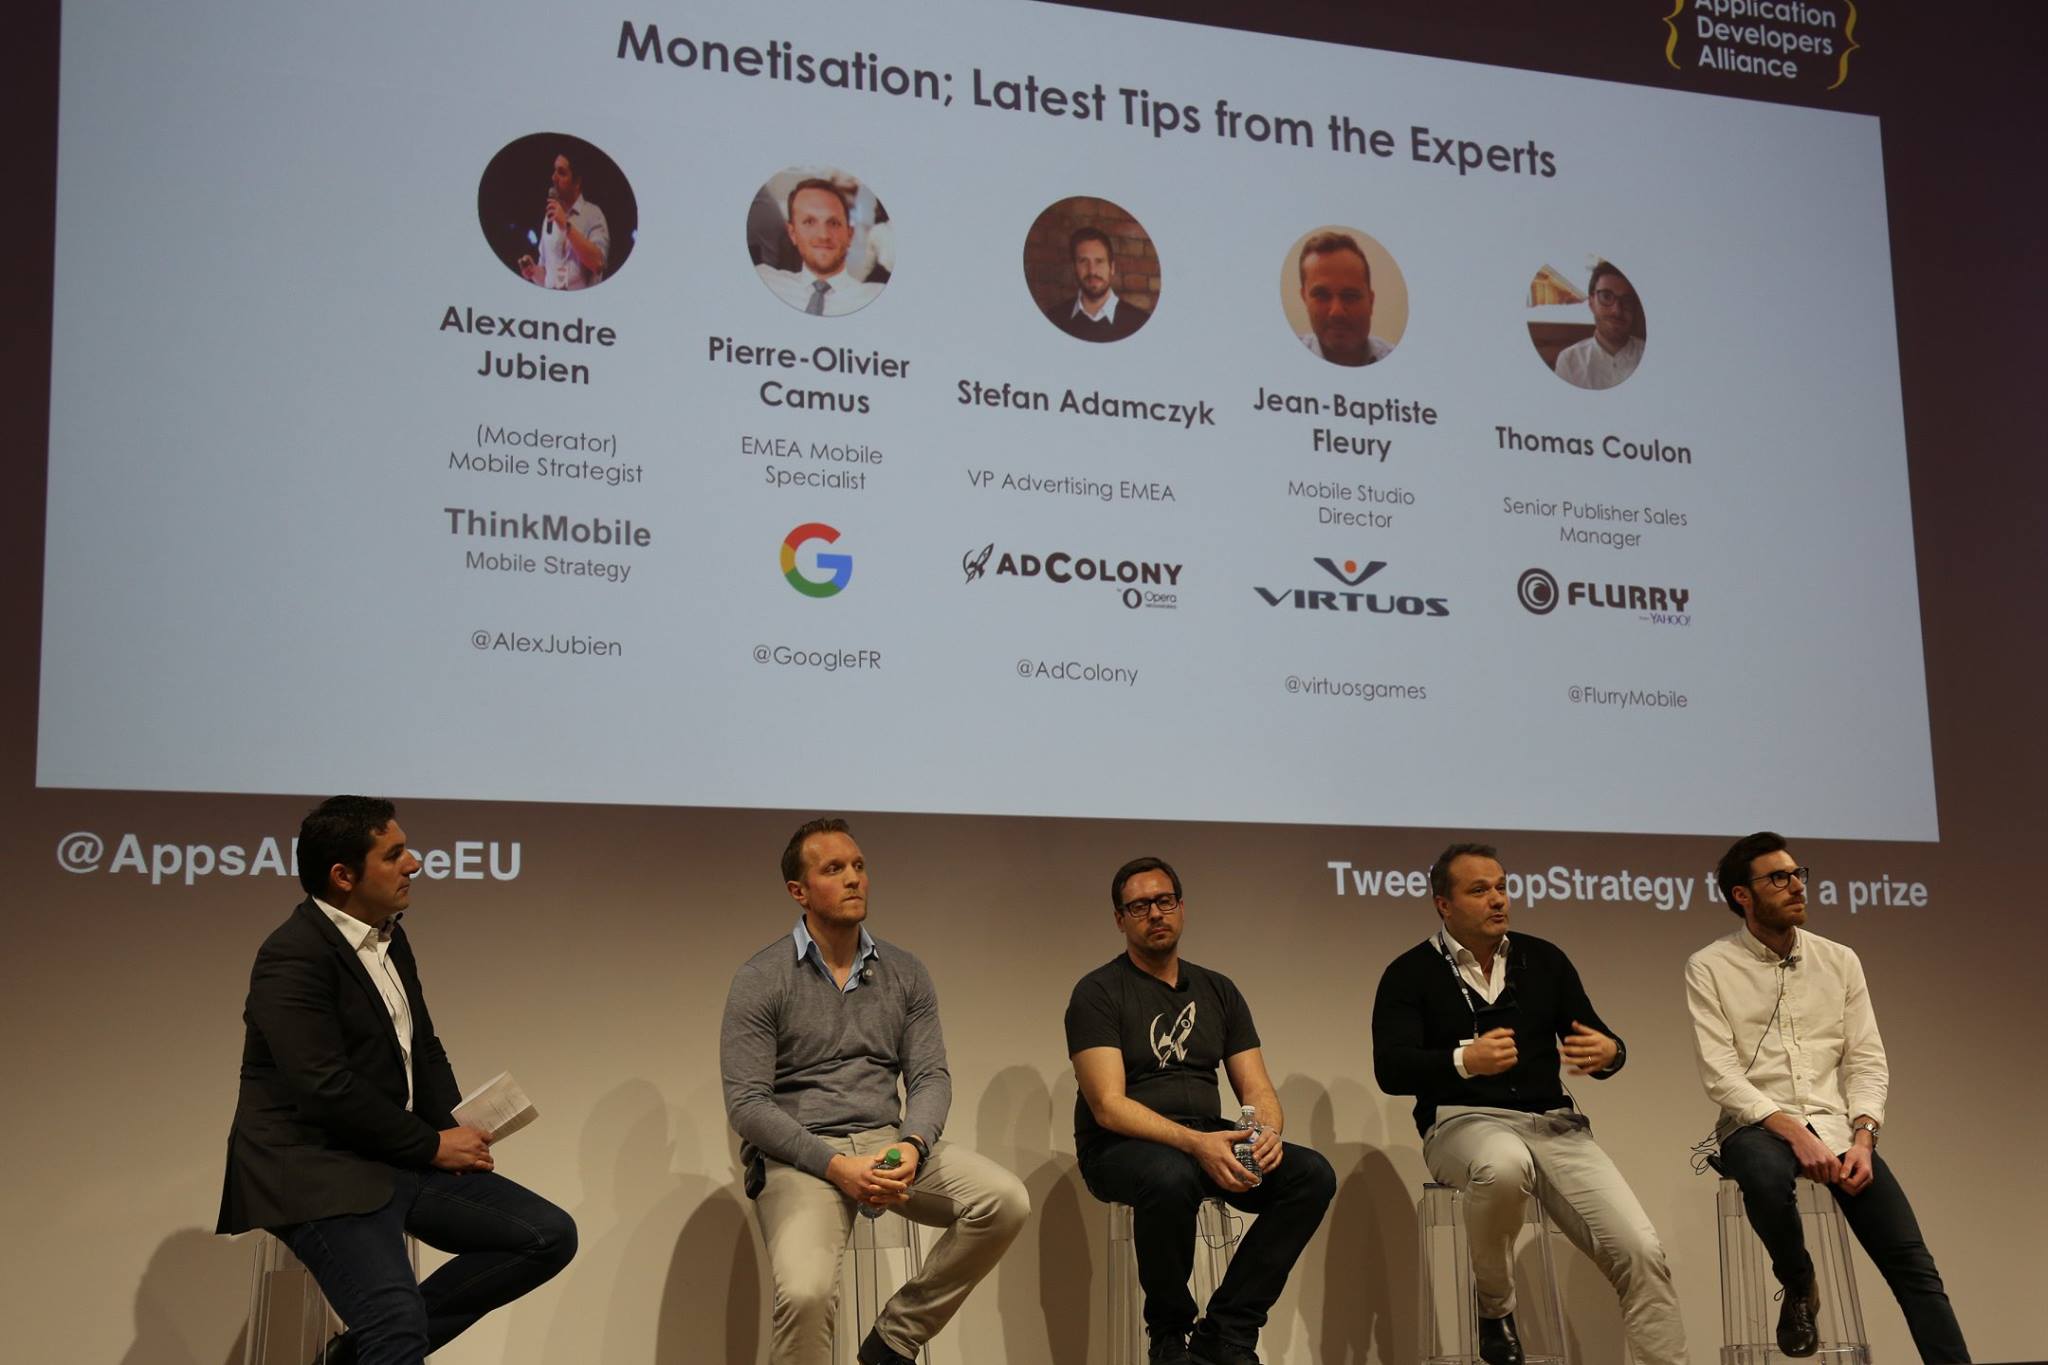 Speaking on the topic of Monetisation, latest tips from the experts were&nbsp;Pierre-Olivier Camus, EMEA Mobile Specialist, Google,&nbsp;Stefan Adamczyk, VP Advertising EMEA, AdColony,&nbsp;Jean-Baptiste Fleury, Mobile Studio Director, Virtuos Games…